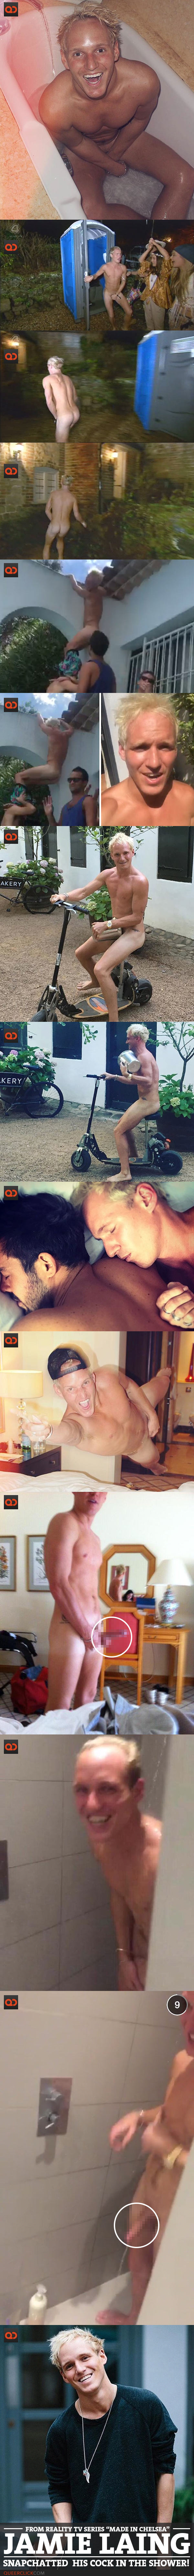 Jamie Laing, From Reality Tv Series “made In Chelsea”, Snapchatted His Cock In The Shower!